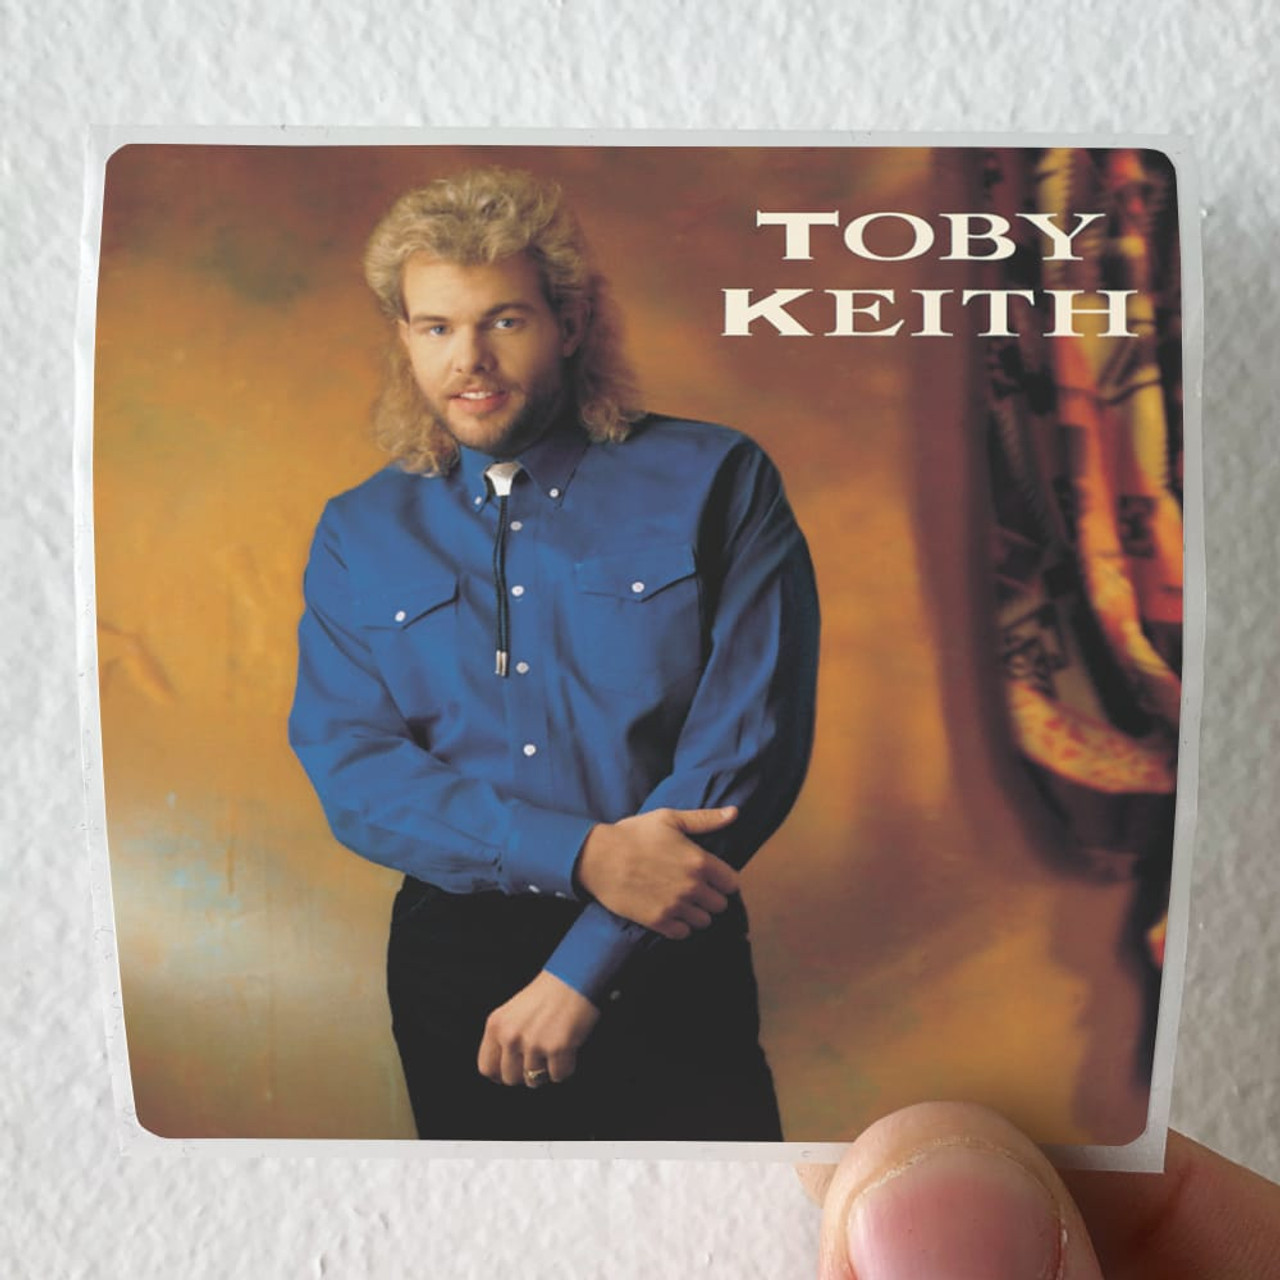 Toby Keith Toby Keith Album Cover Sticker